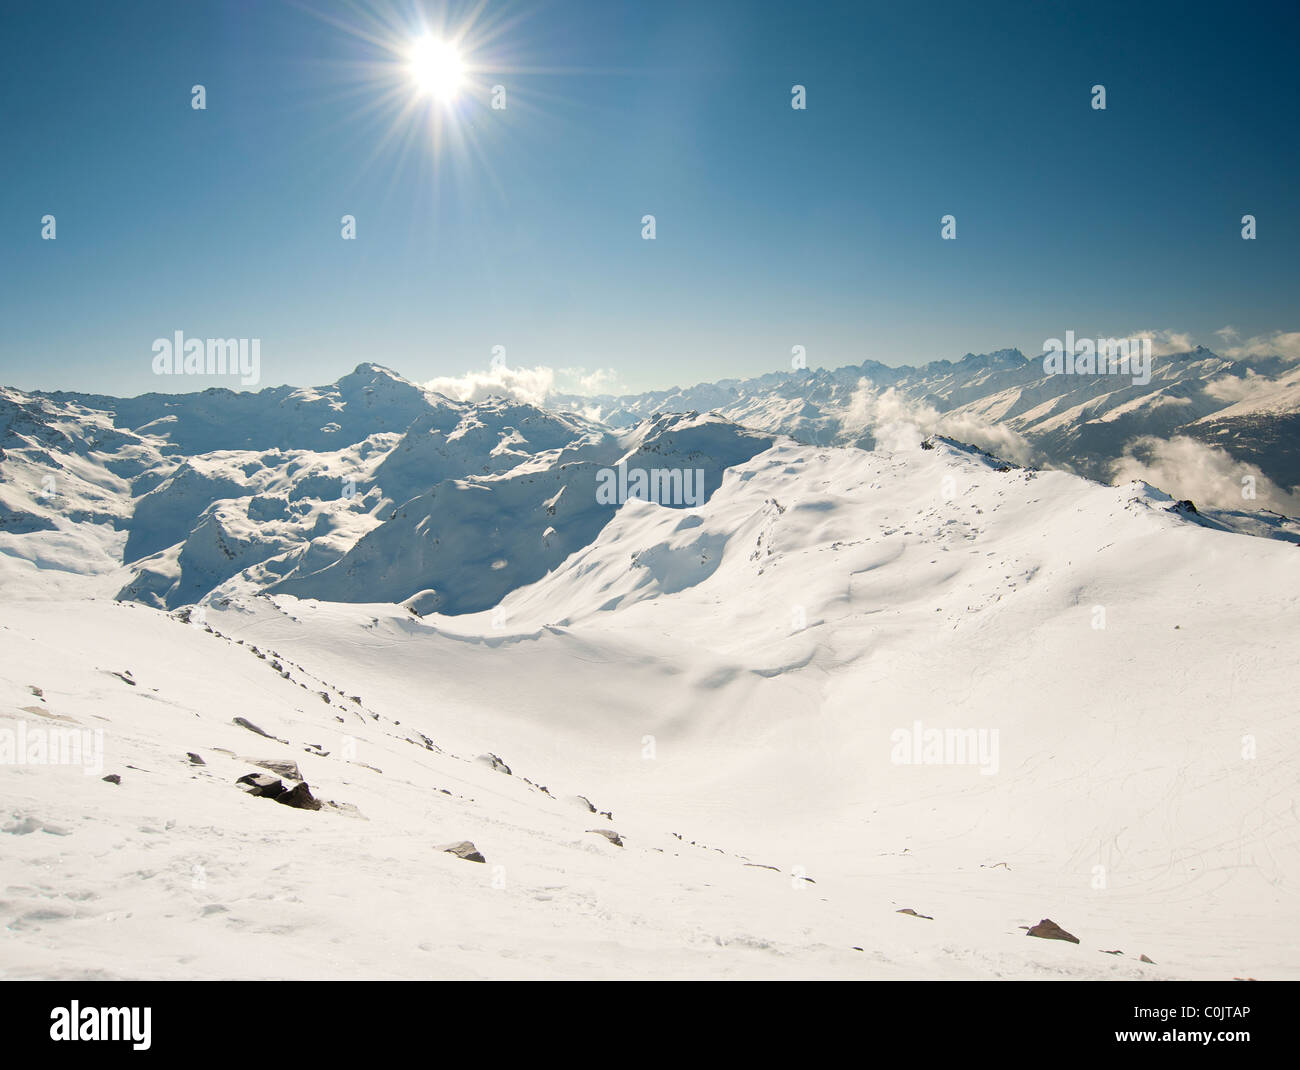 Landscape view across a snowy mountain range with the sun Stock Photo